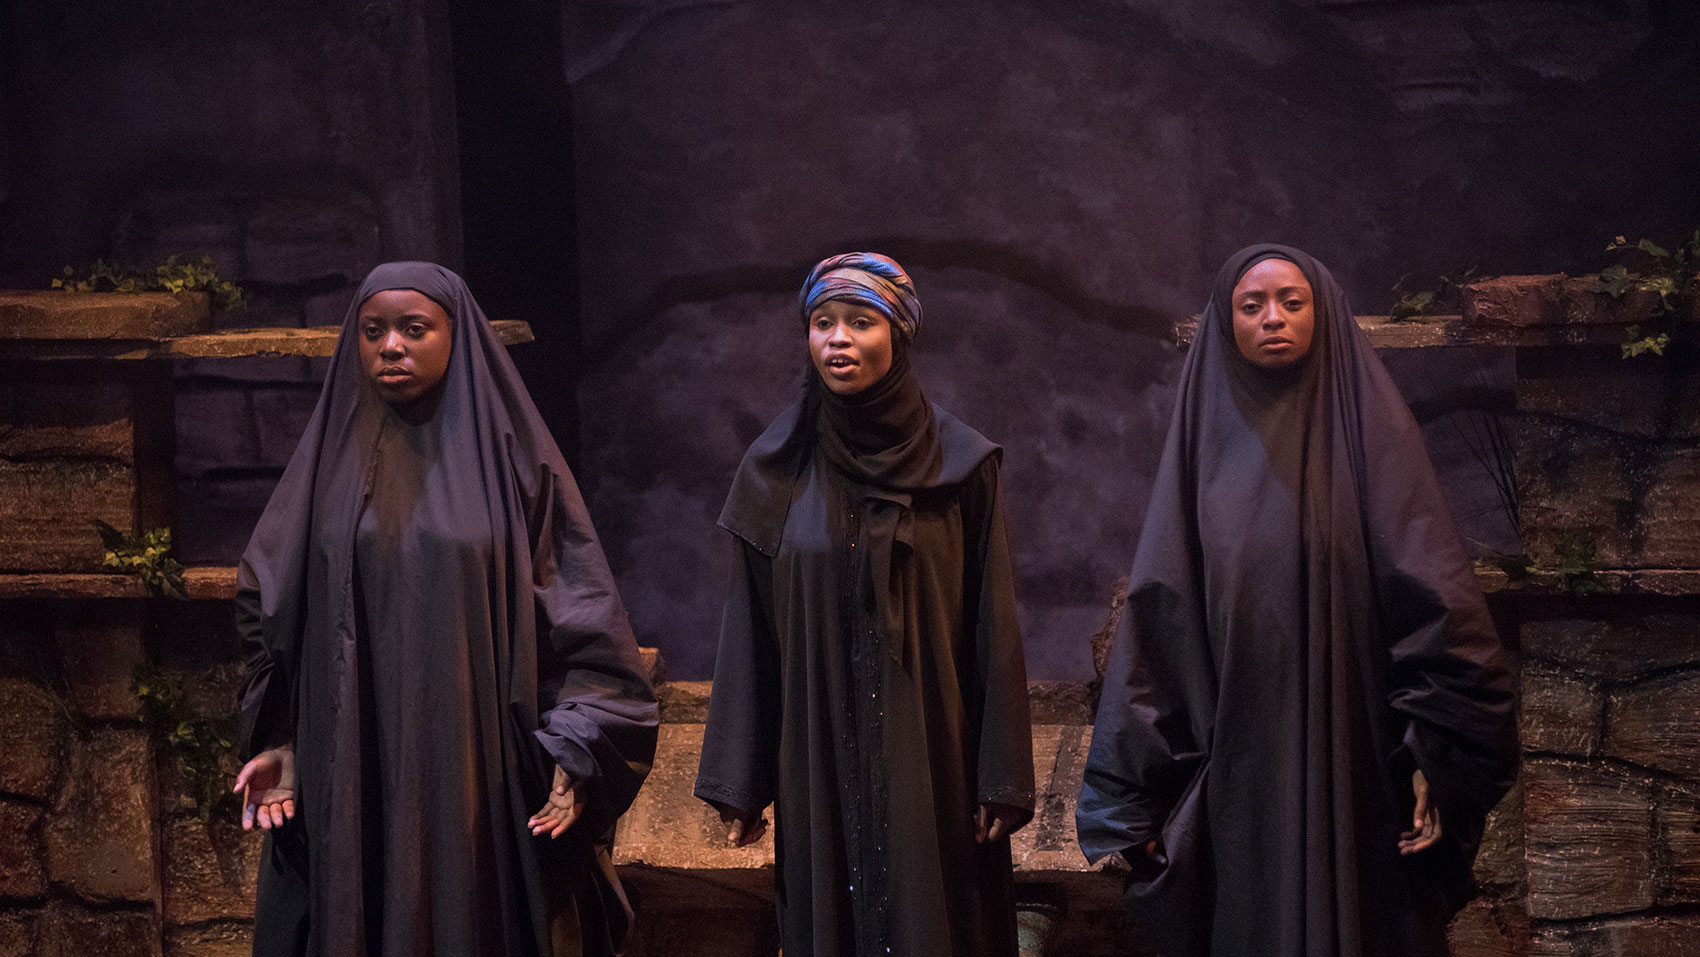 Three woman stand onstage in black, full-length body coverings, two with their hair covered by these coverings while one woman in the middle wears a colorful headscarf and is speaking. 